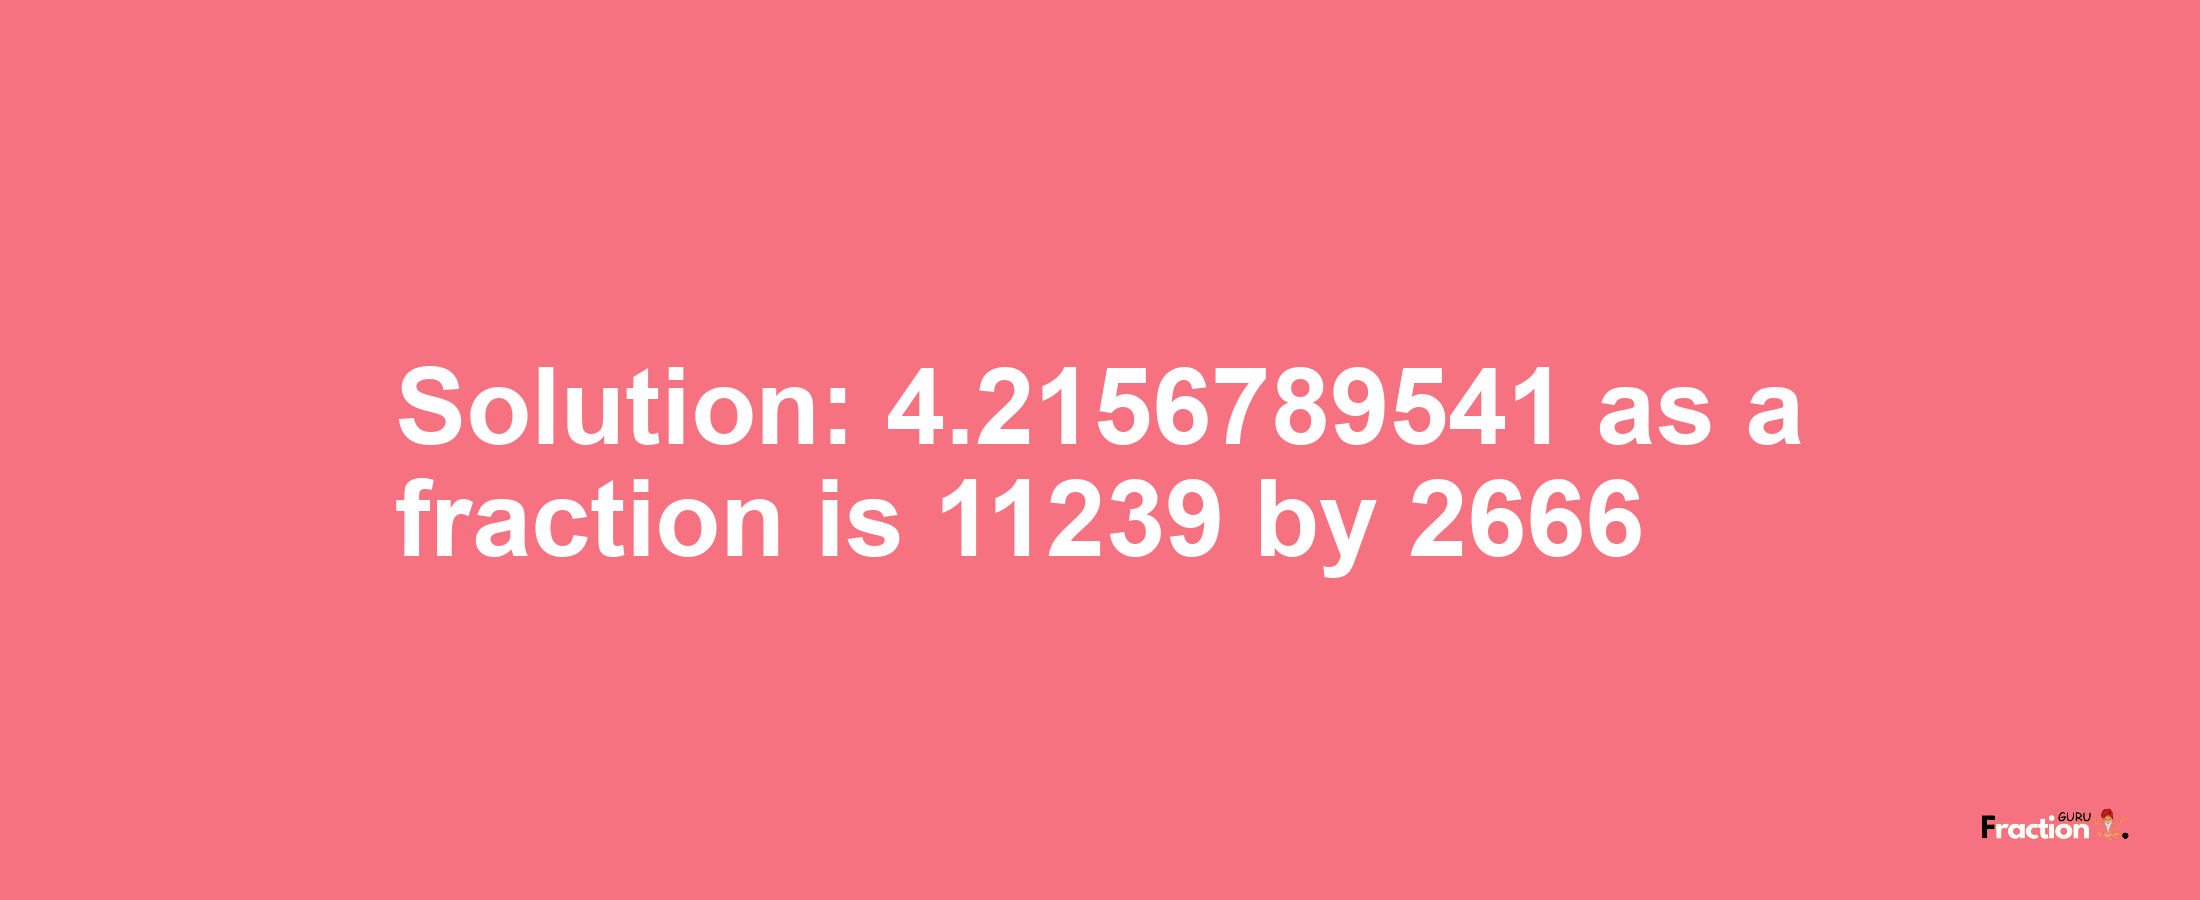 Solution:4.2156789541 as a fraction is 11239/2666